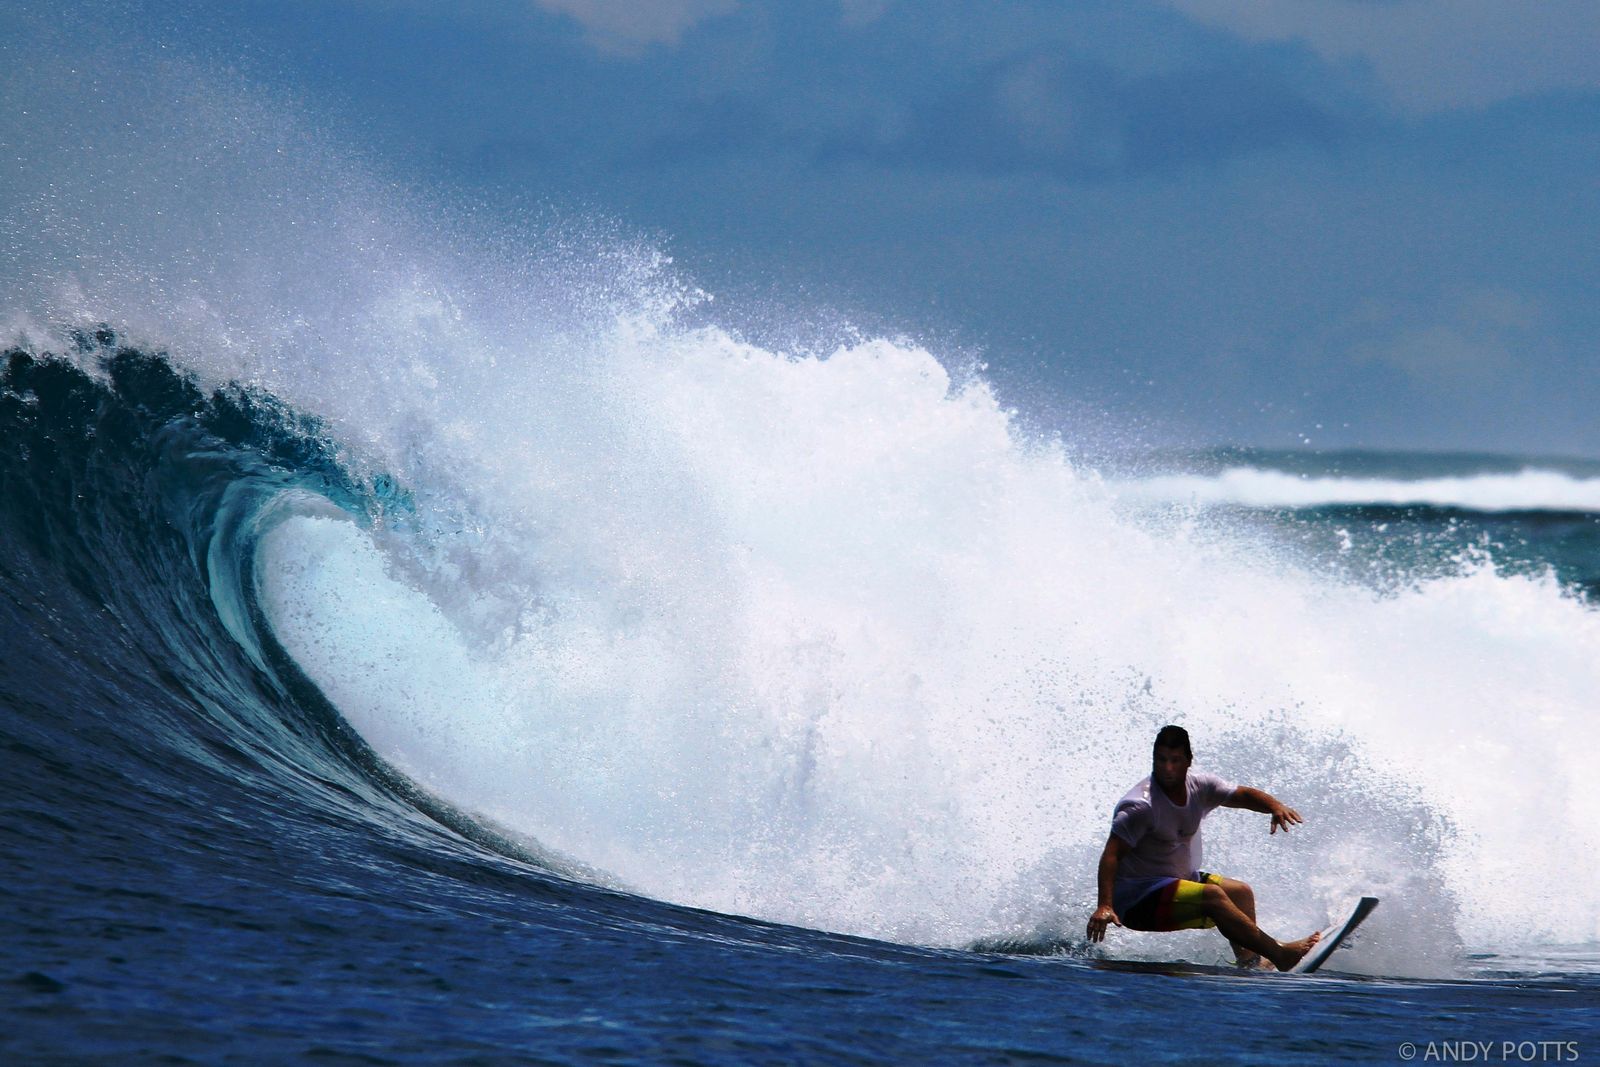 Mark Occy Occhilupo surfing Suicides in the Mentawai